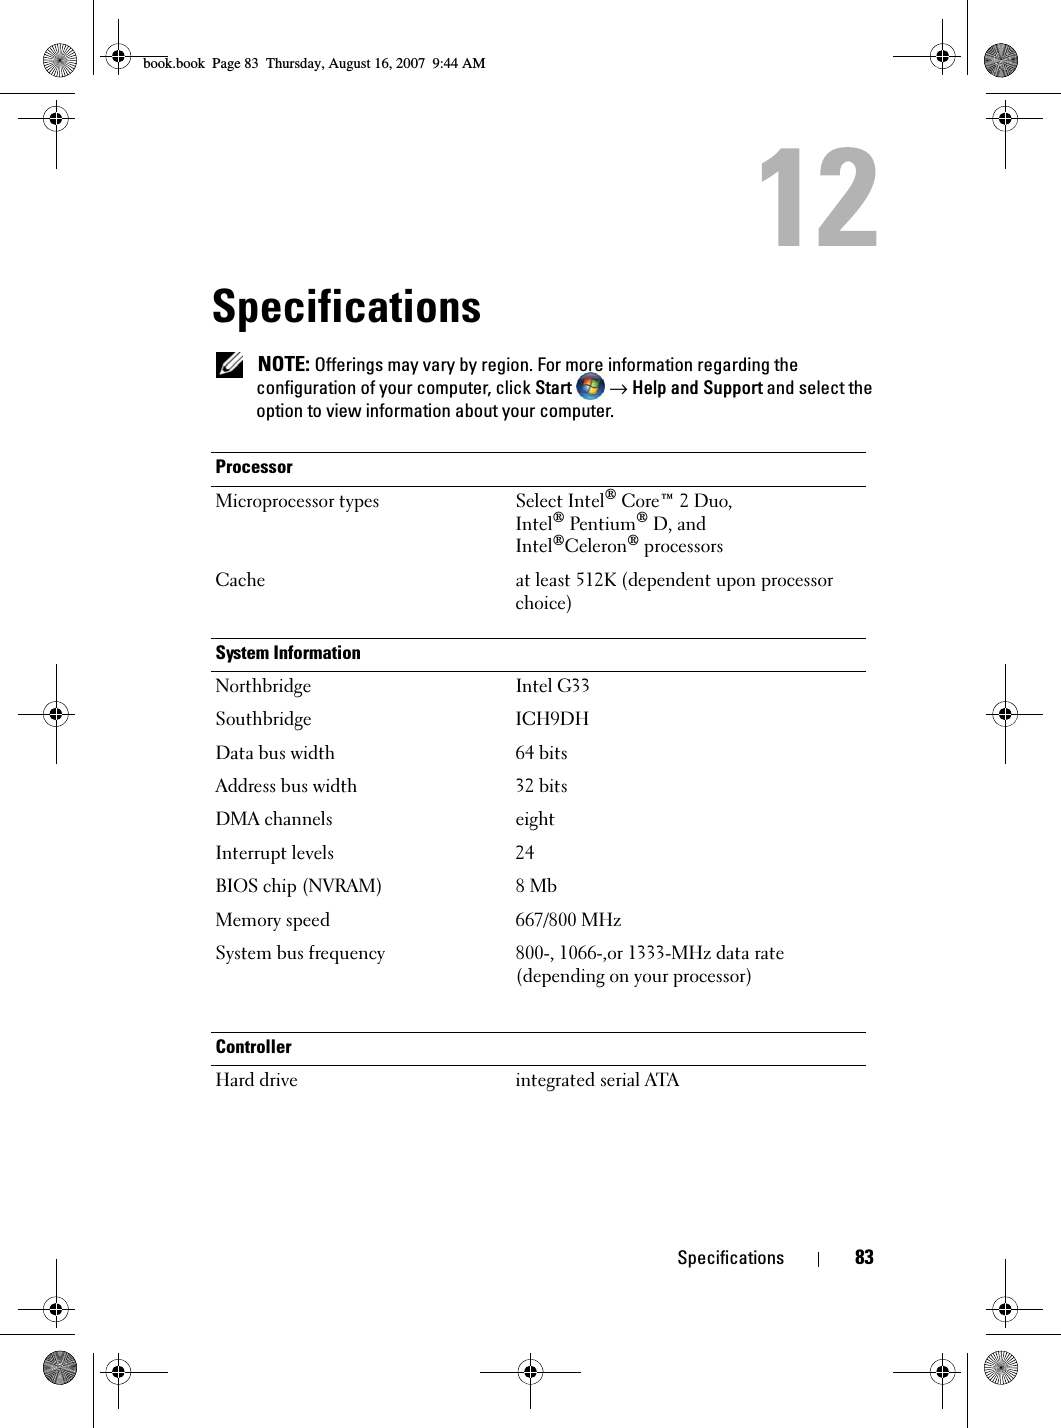 Specifications 83Specifications NOTE: Offerings may vary by region. For more information regarding the configuration of your computer, click Start   → Help and Support and select the option to view information about your computer.ProcessorMicroprocessor types Select Intel® Core™ 2 Duo,Intel® Pentium® D, and Intel®Celeron® processorsCache at least 512K (dependent upon processor choice)System InformationNorthbridge Intel G33Southbridge ICH9DHData bus width 64 bitsAddress bus width 32 bitsDMA channels eightInterrupt levels 24BIOS chip (NVRAM) 8 MbMemory speed 667/800 MHzSystem bus frequency 800-, 1066-,or 1333-MHz data rate (depending on your processor)ControllerHard drive integrated serial ATAbook.book  Page 83  Thursday, August 16, 2007  9:44 AM